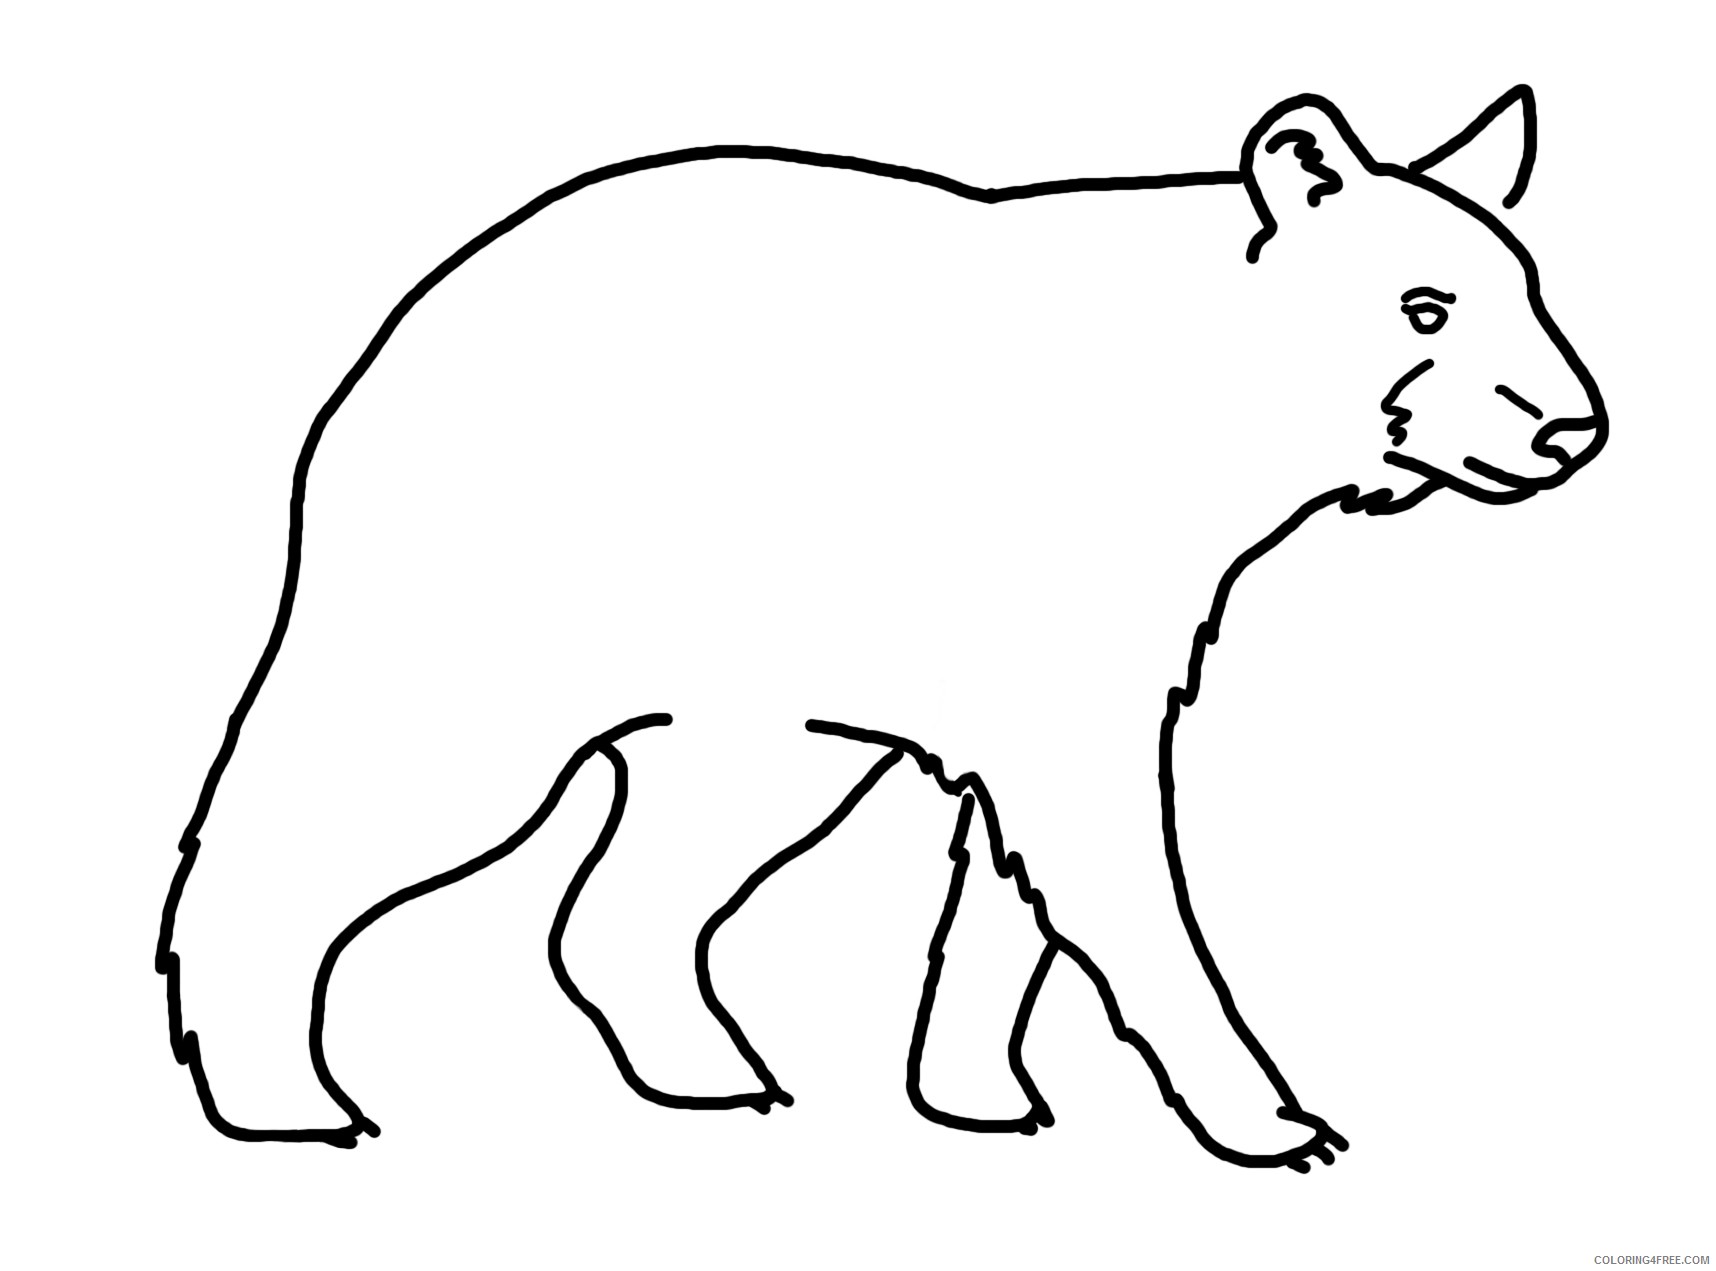 29 bear line drawing that you can download to you efgAII coloring